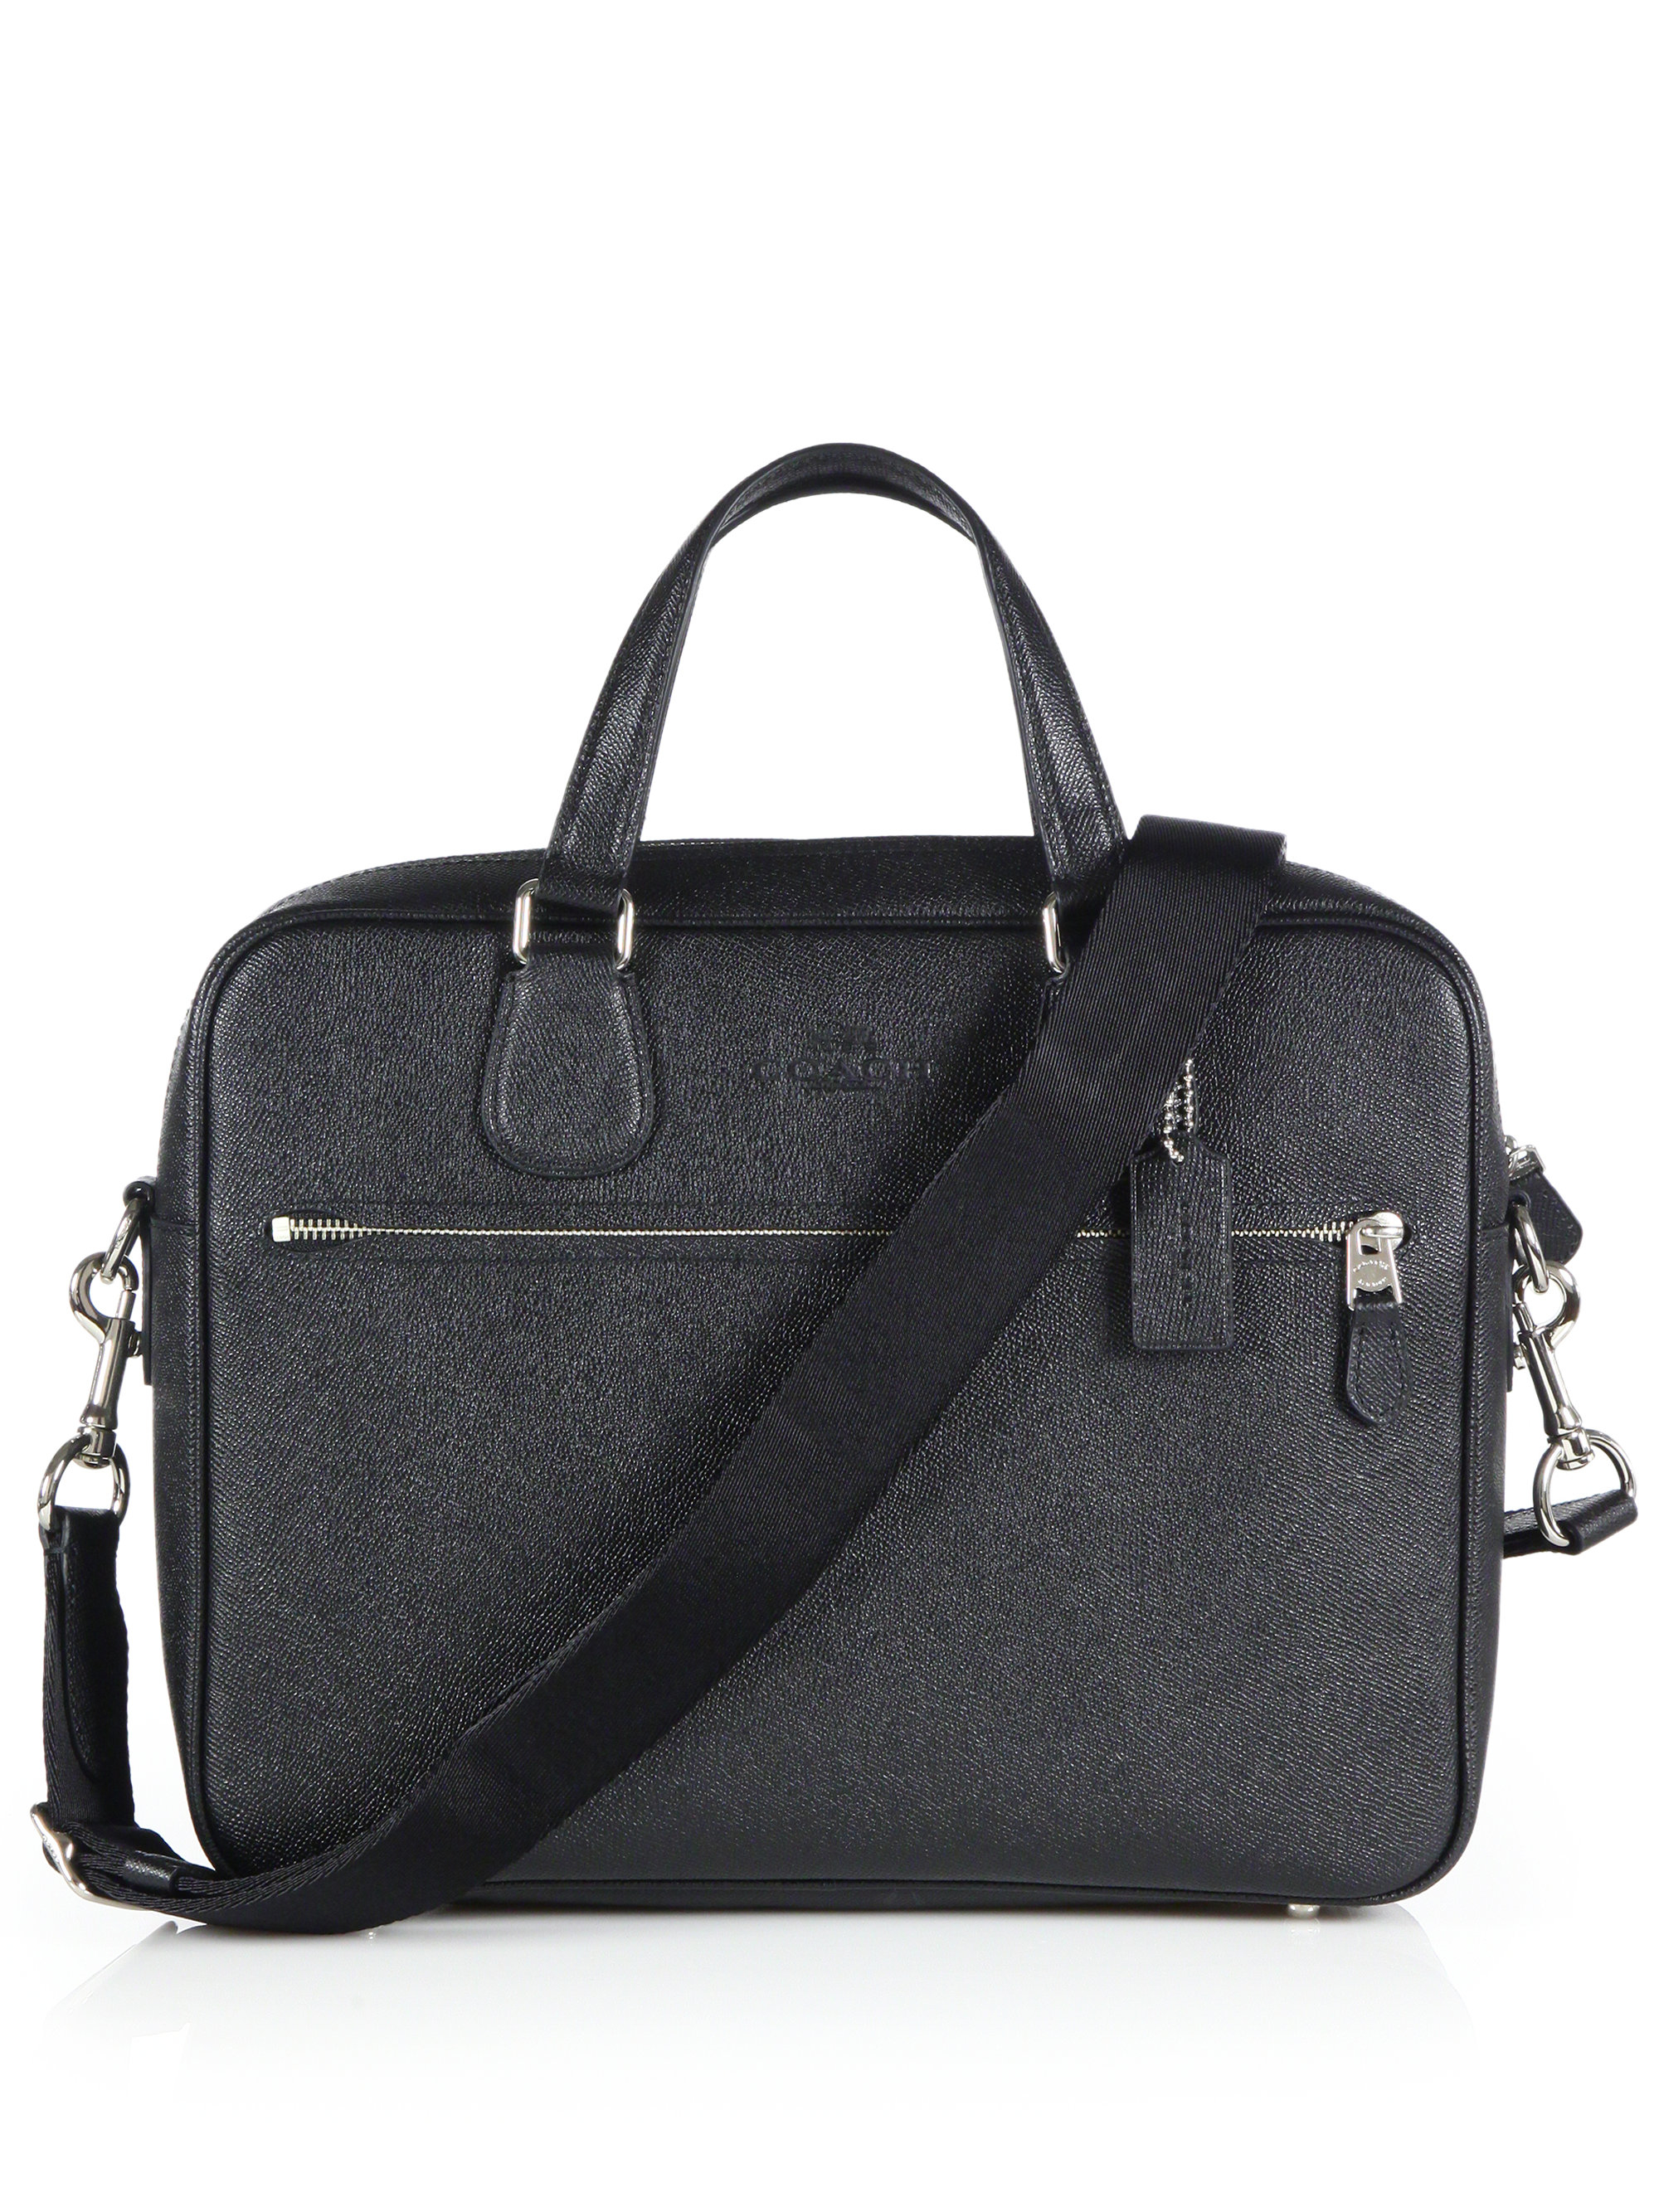 COACH Hudson 5 Leather Briefcase in Black for Men - Lyst